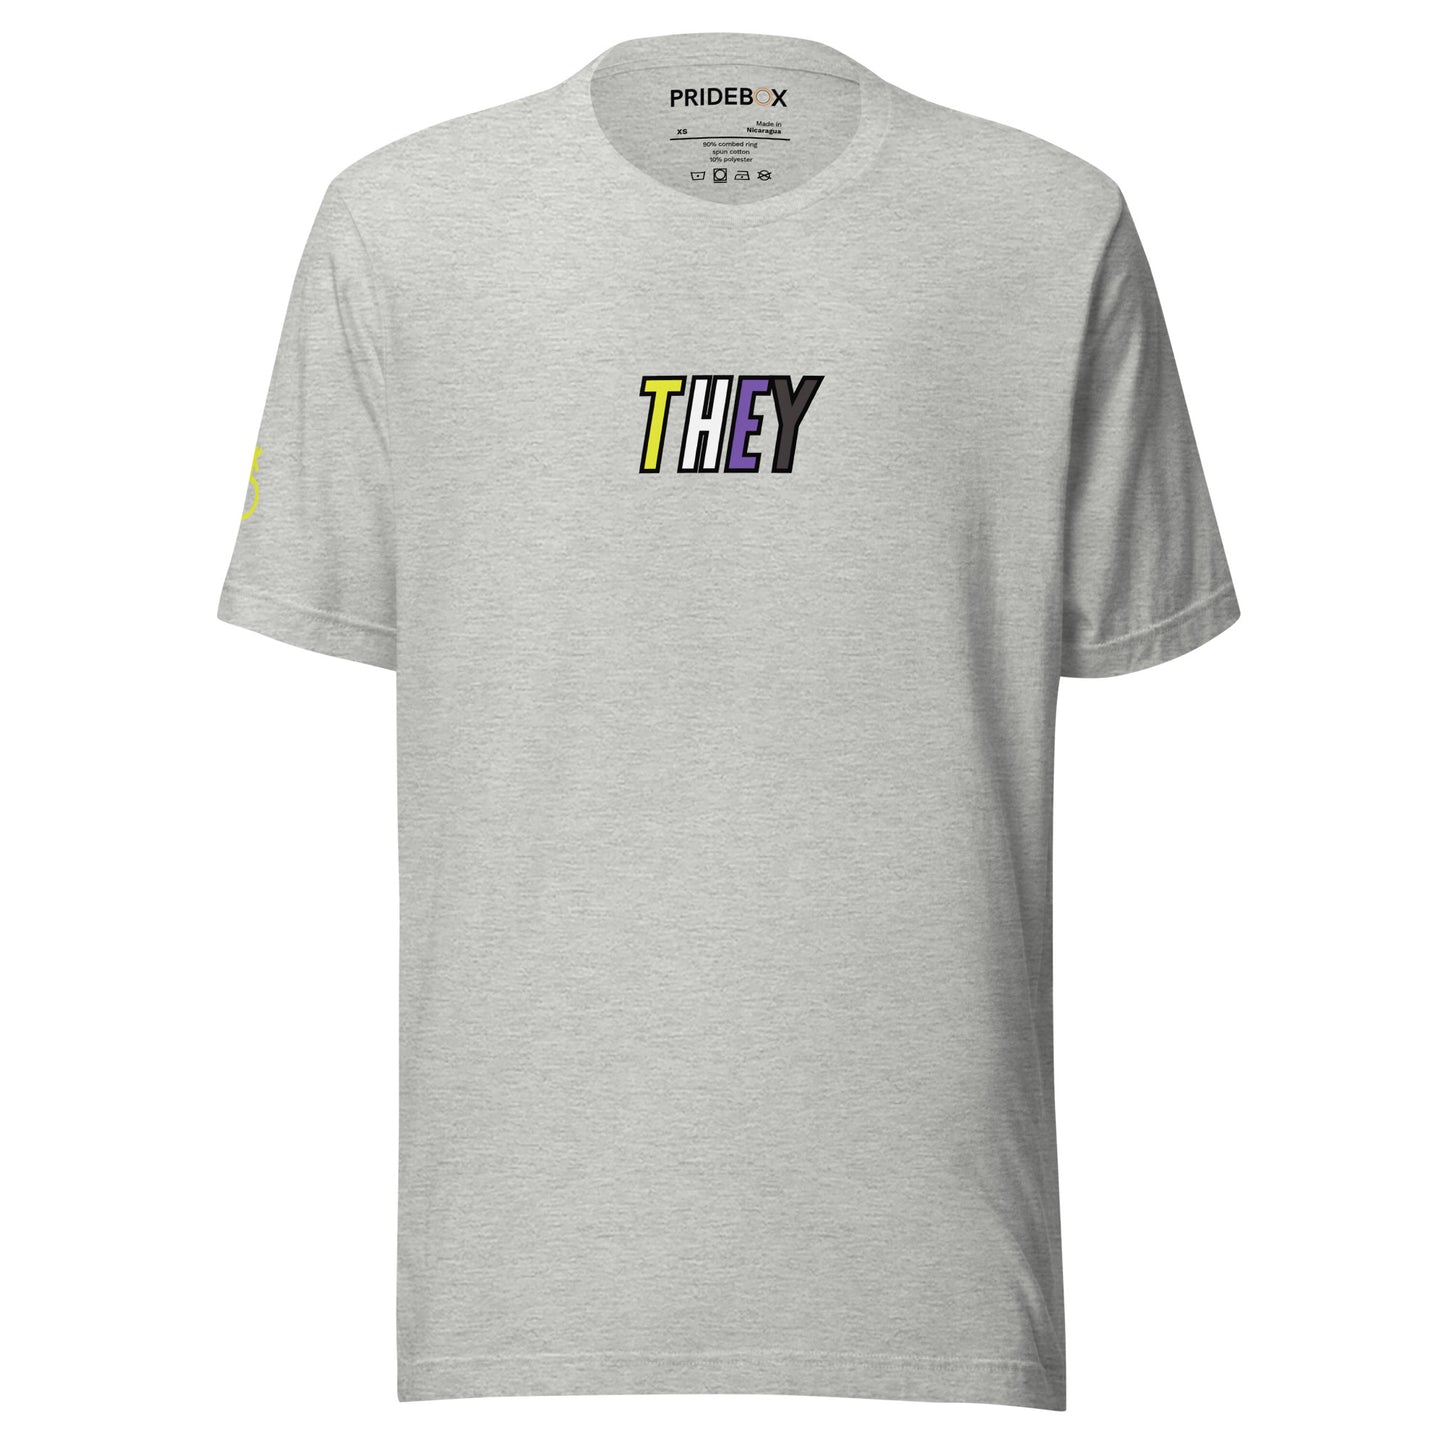 NonBinary Pride They Unisex t-shirt